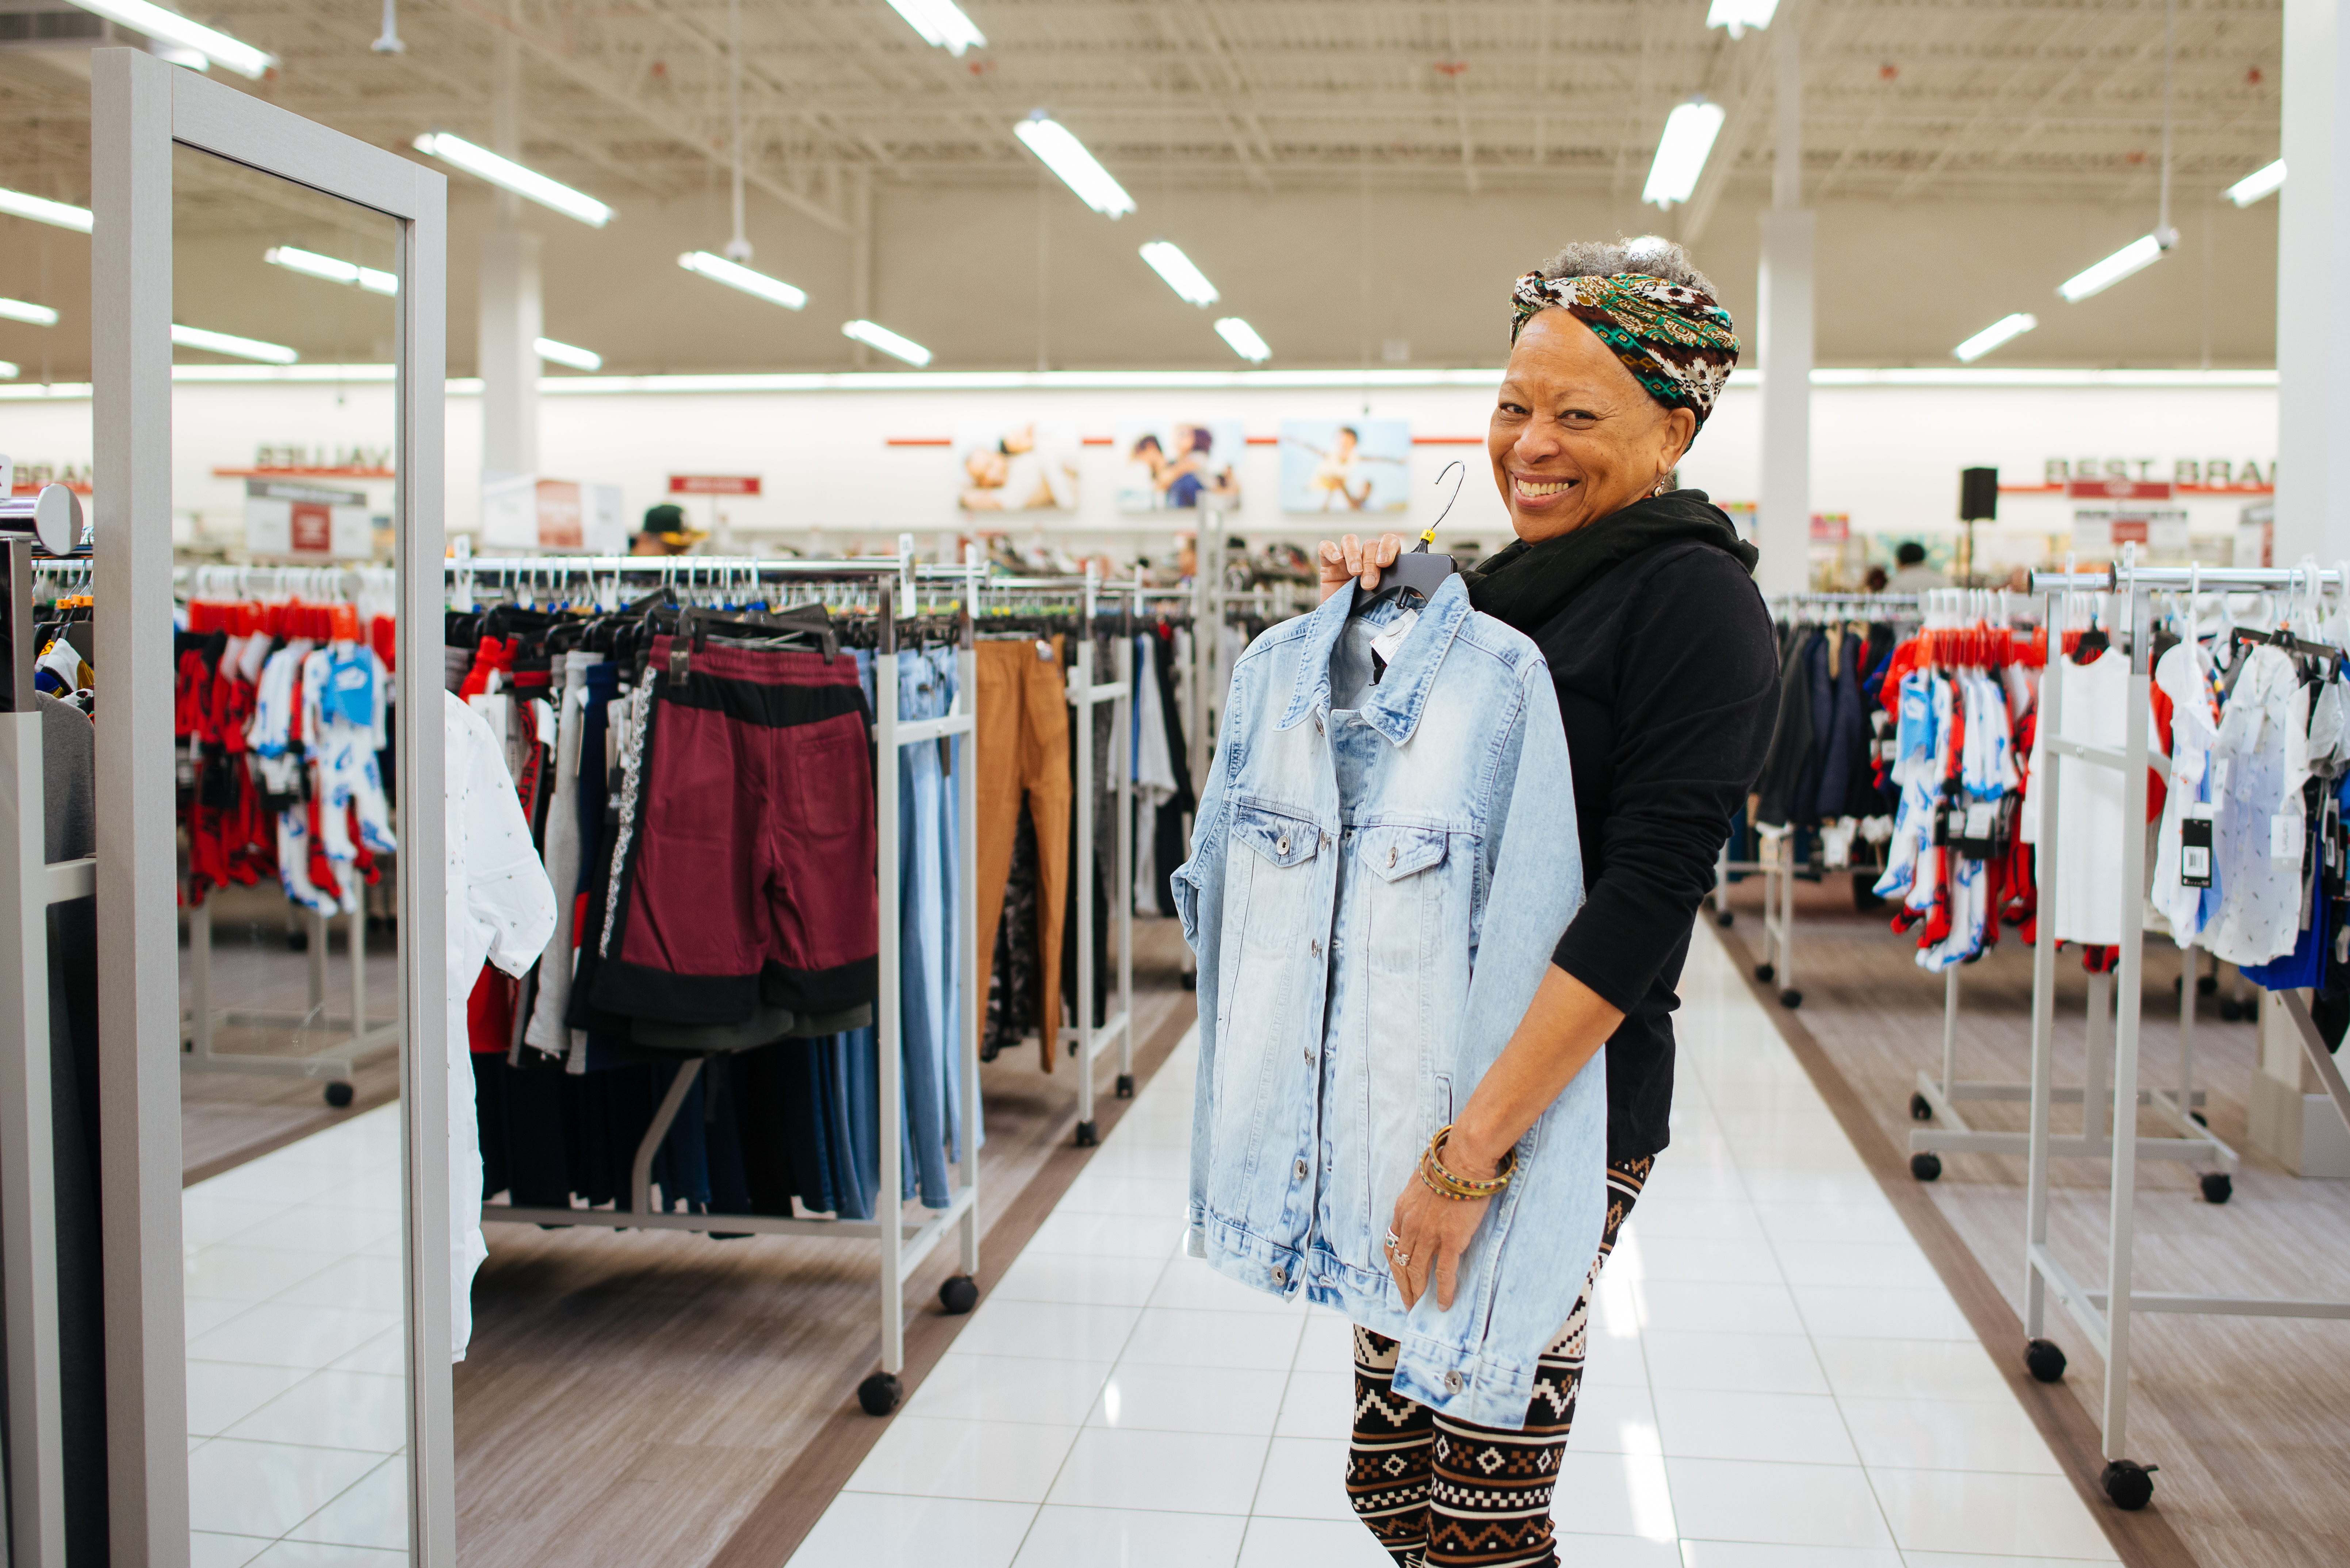 Woman excited about her denim jacket she will buy.